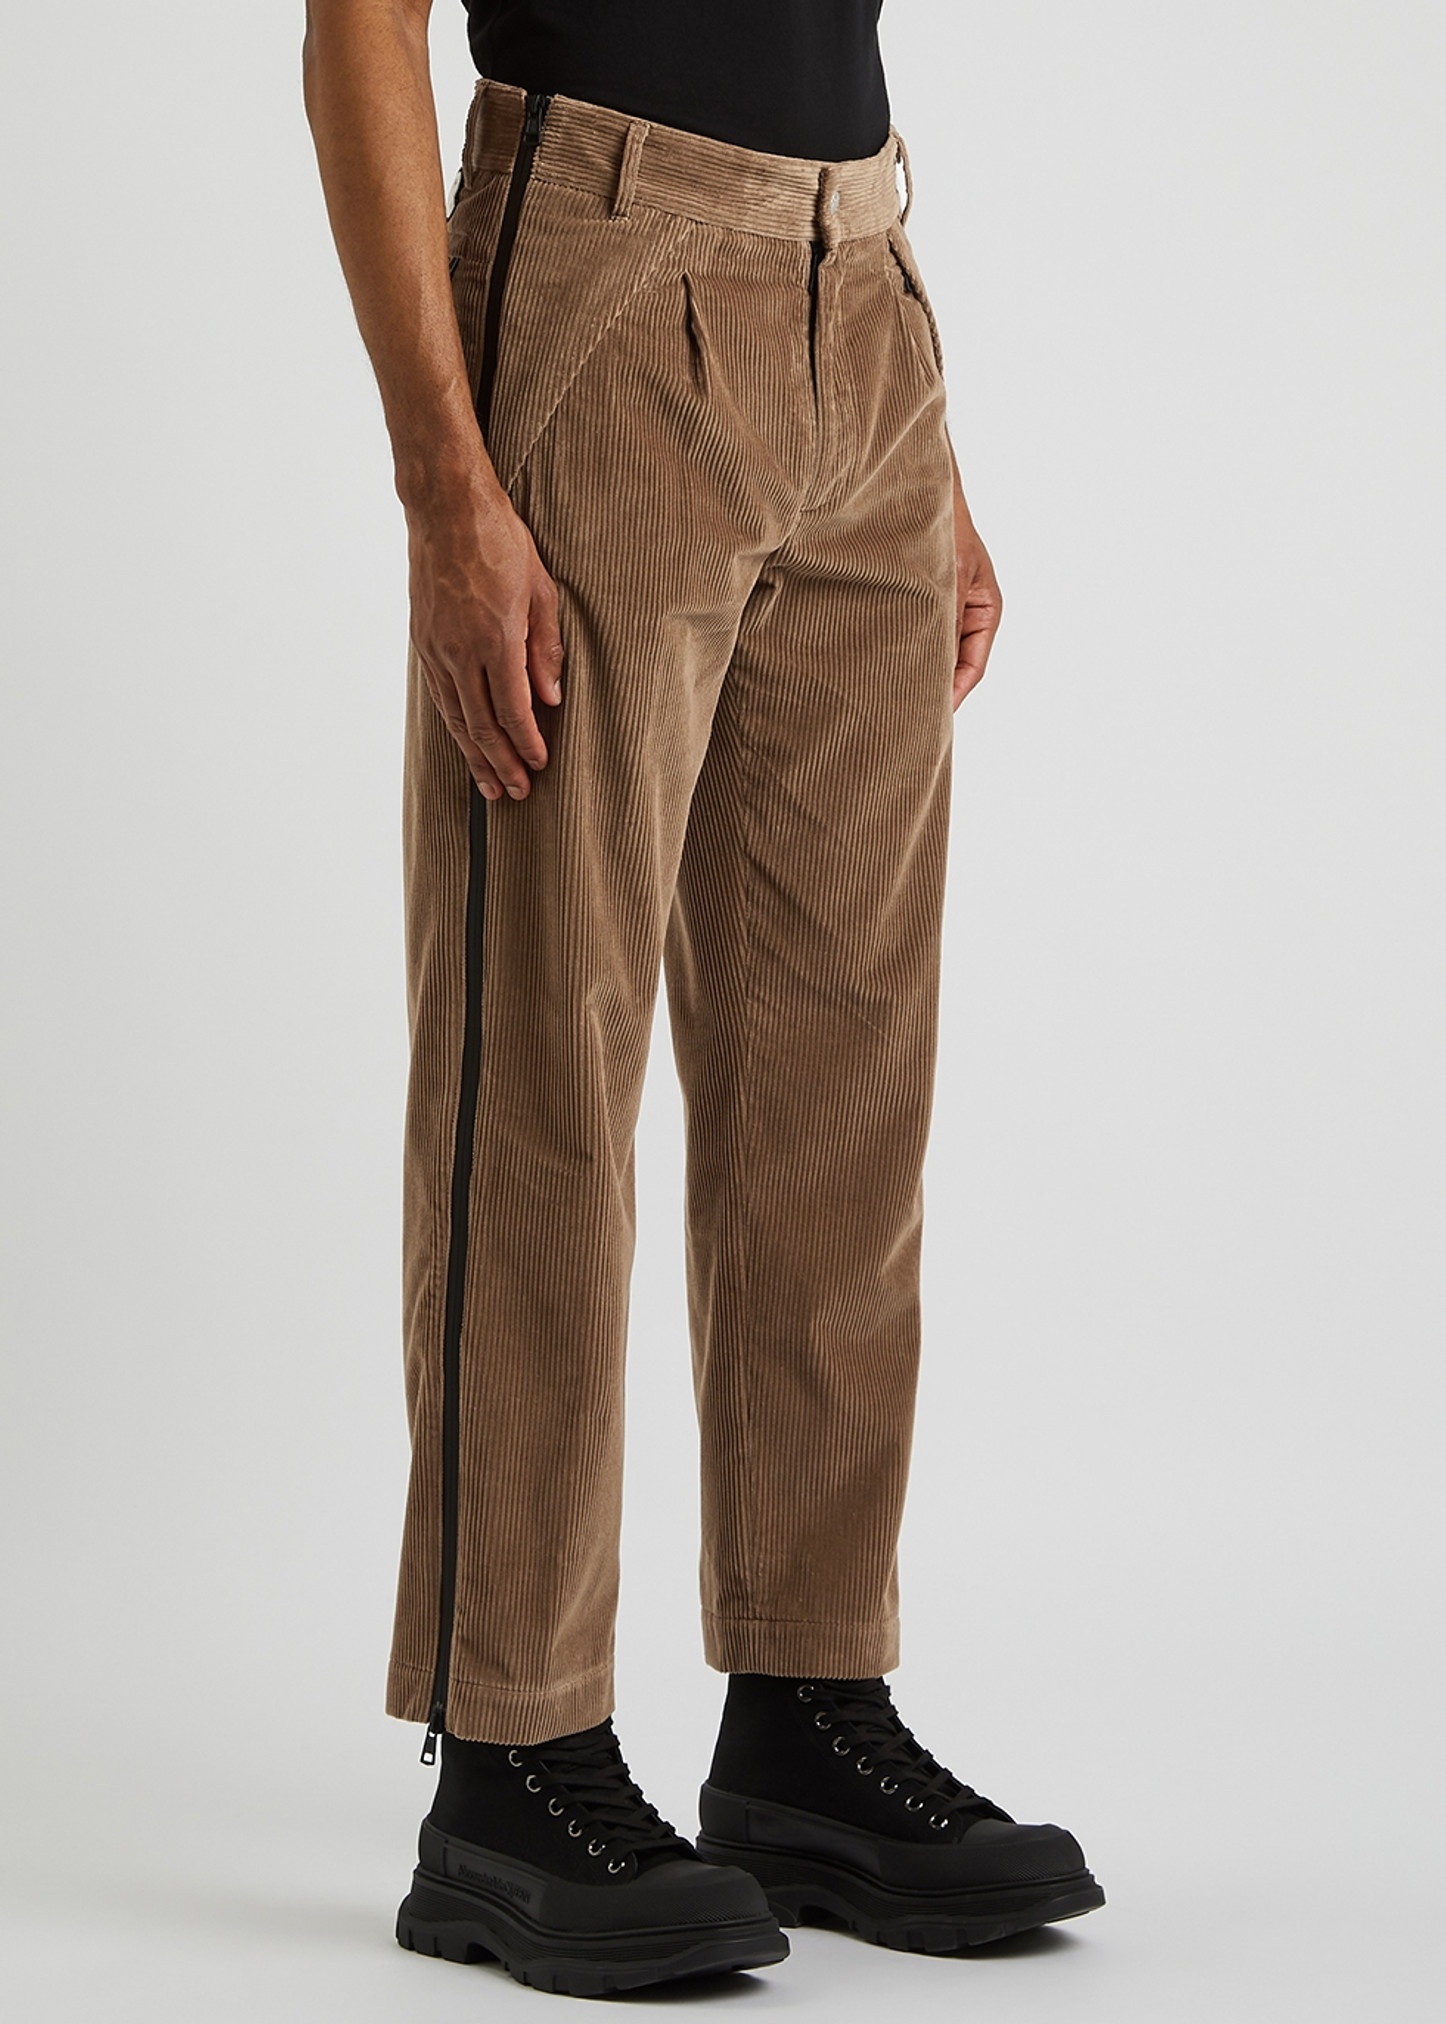 8 Moncler Palm Angels brown corduroy trousers - 2